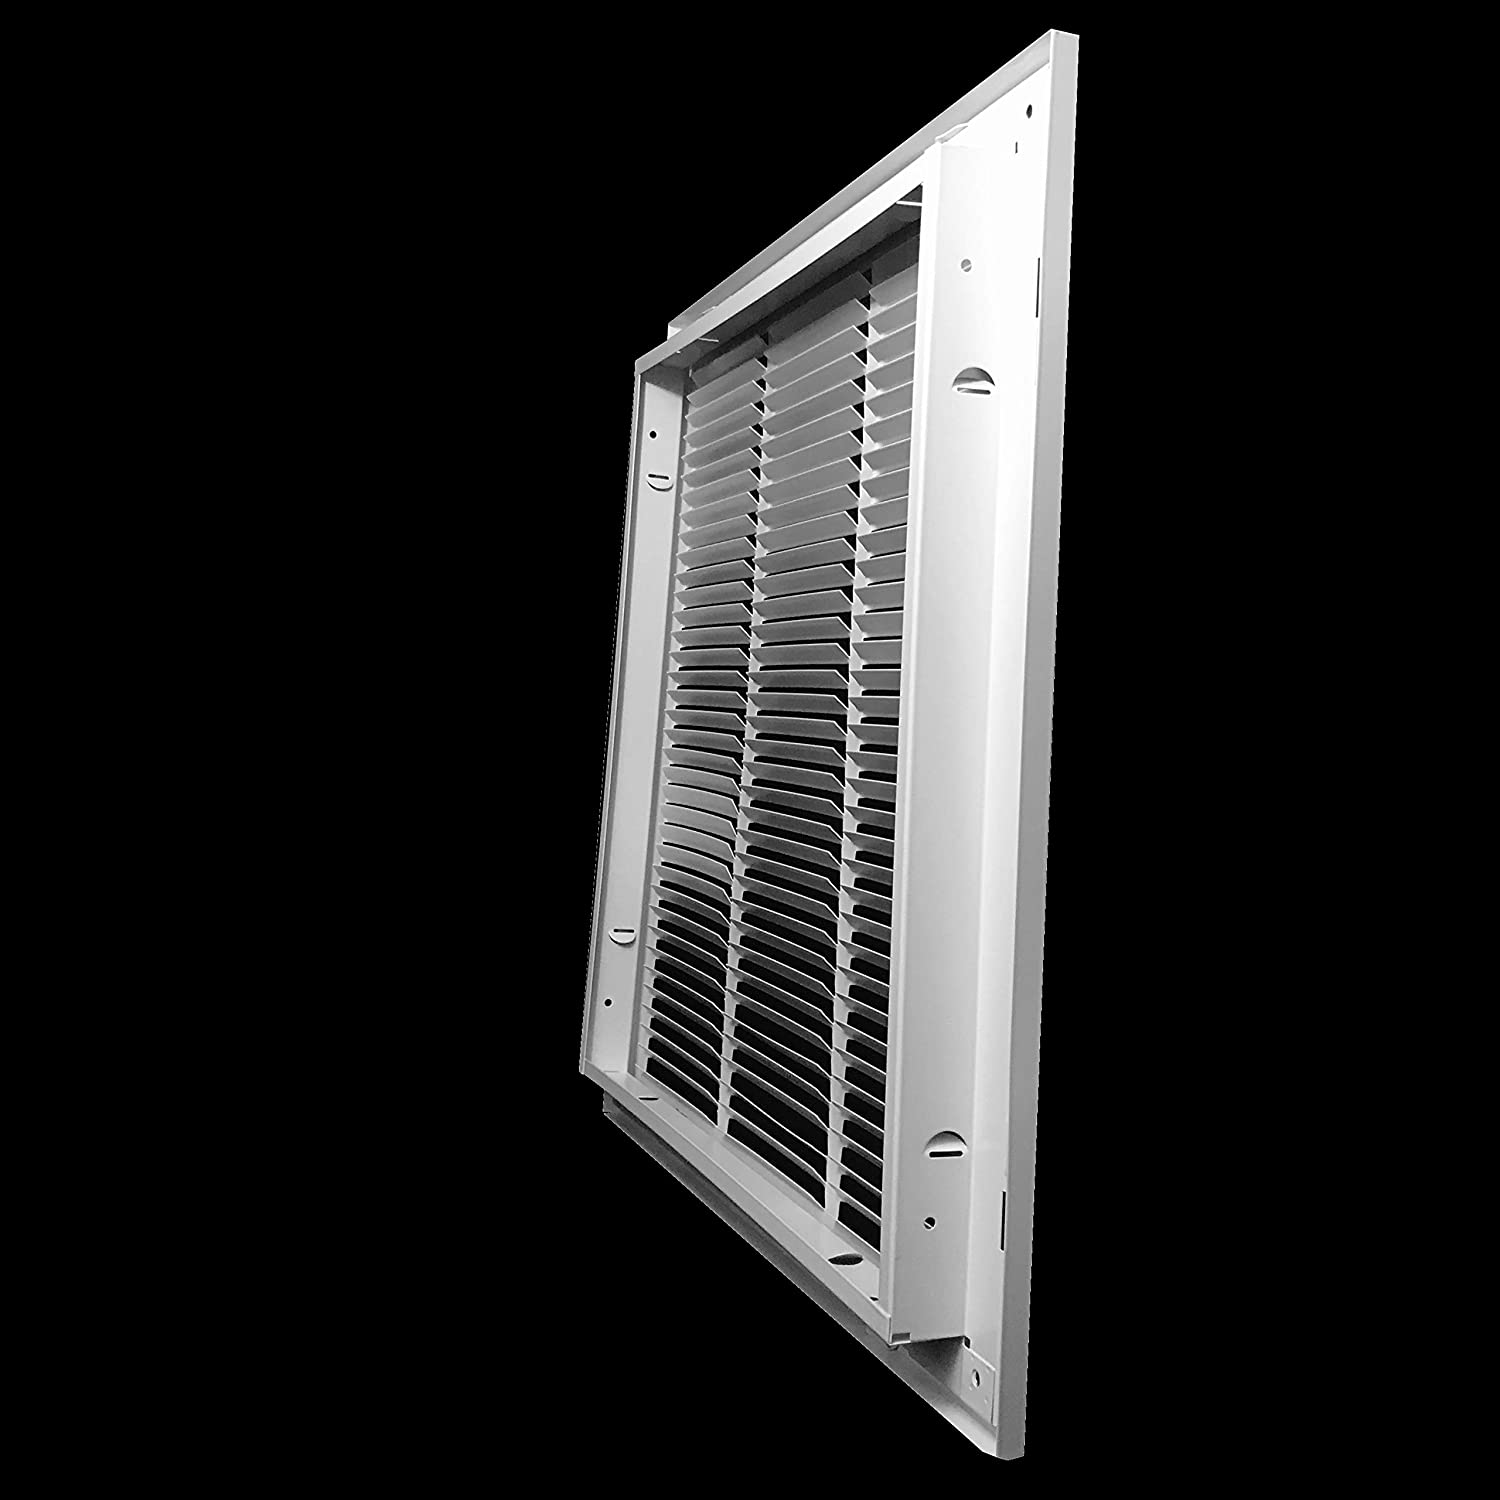 12" X 12" Duct Opening | Steel Return Air Filter Grille for Sidewall and Ceiling